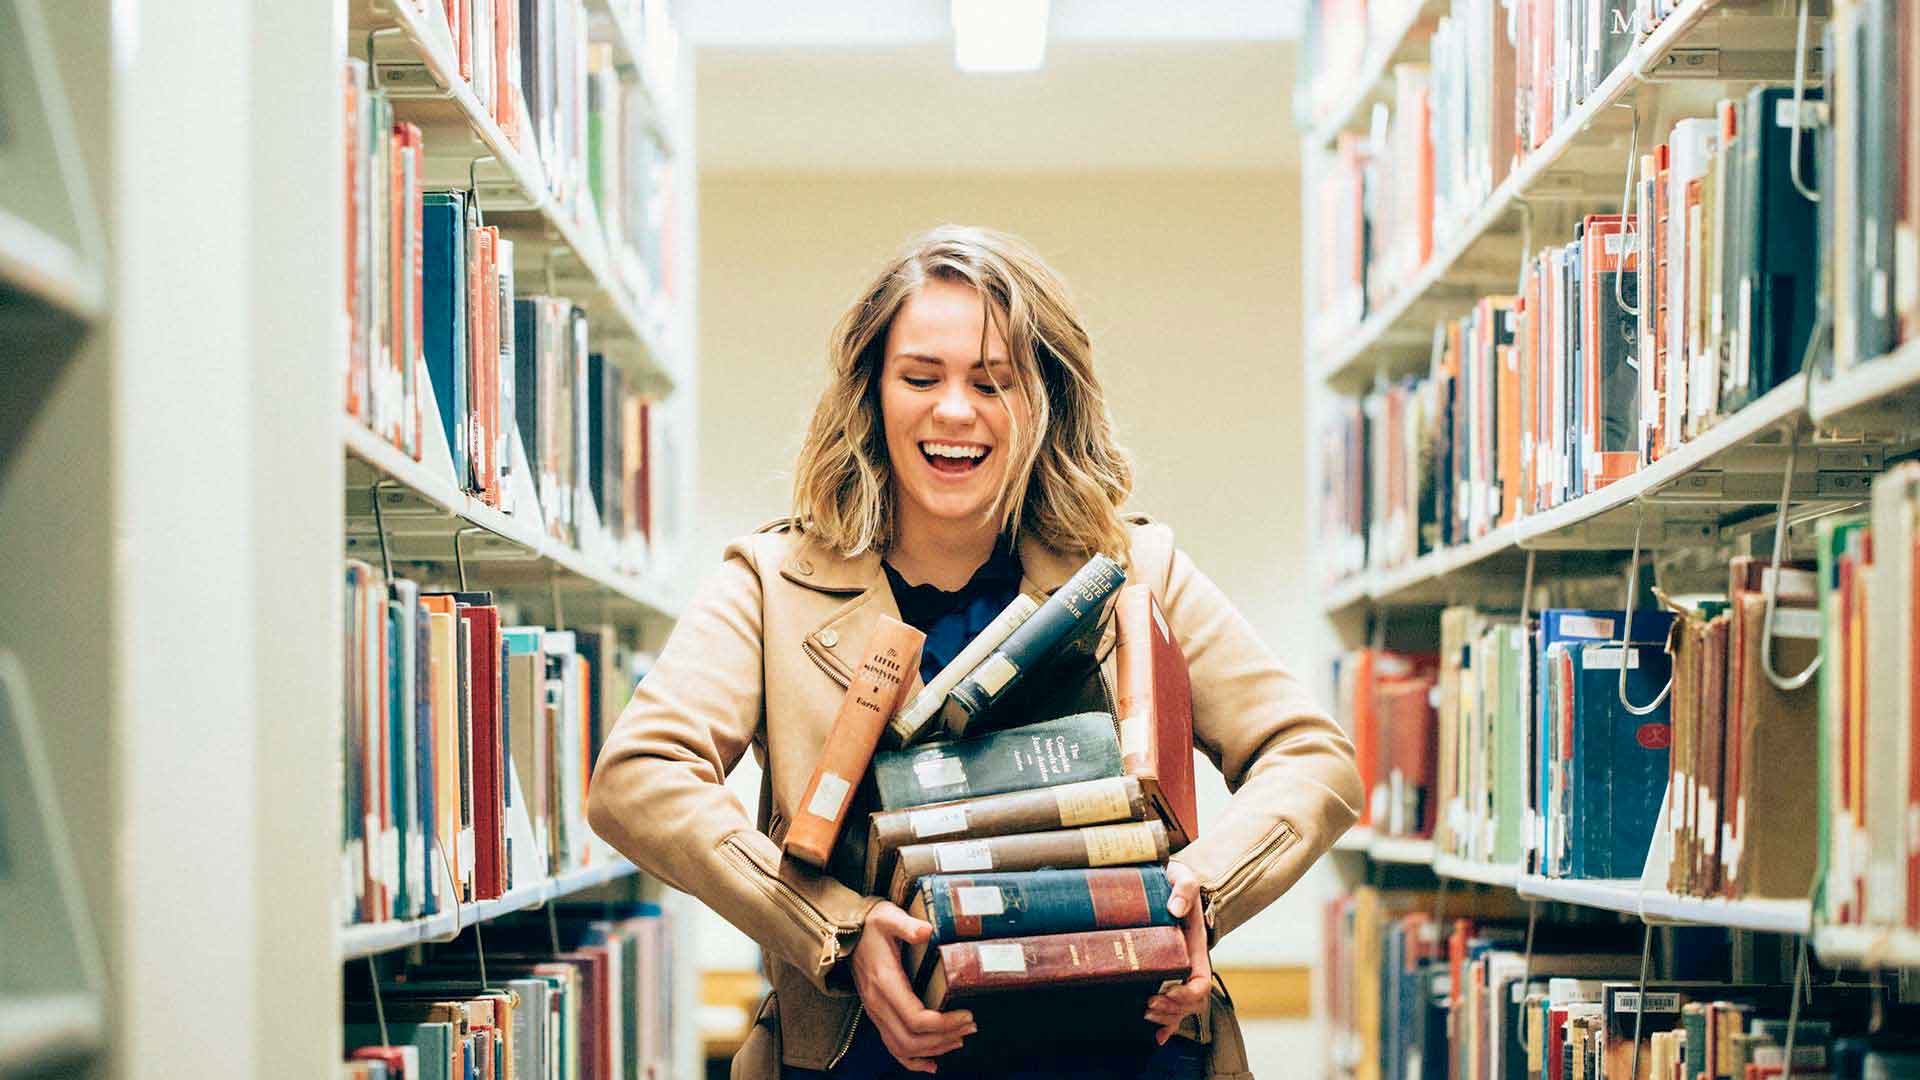   Senior English major Halle Mason poses for a portrait while holding a stack of books in the O'Shaughnessy-Frey Library Center in St. Paul on November 21, 2017. Mason is obsessive about Jane Austen and publishes a popular blog about dating. 